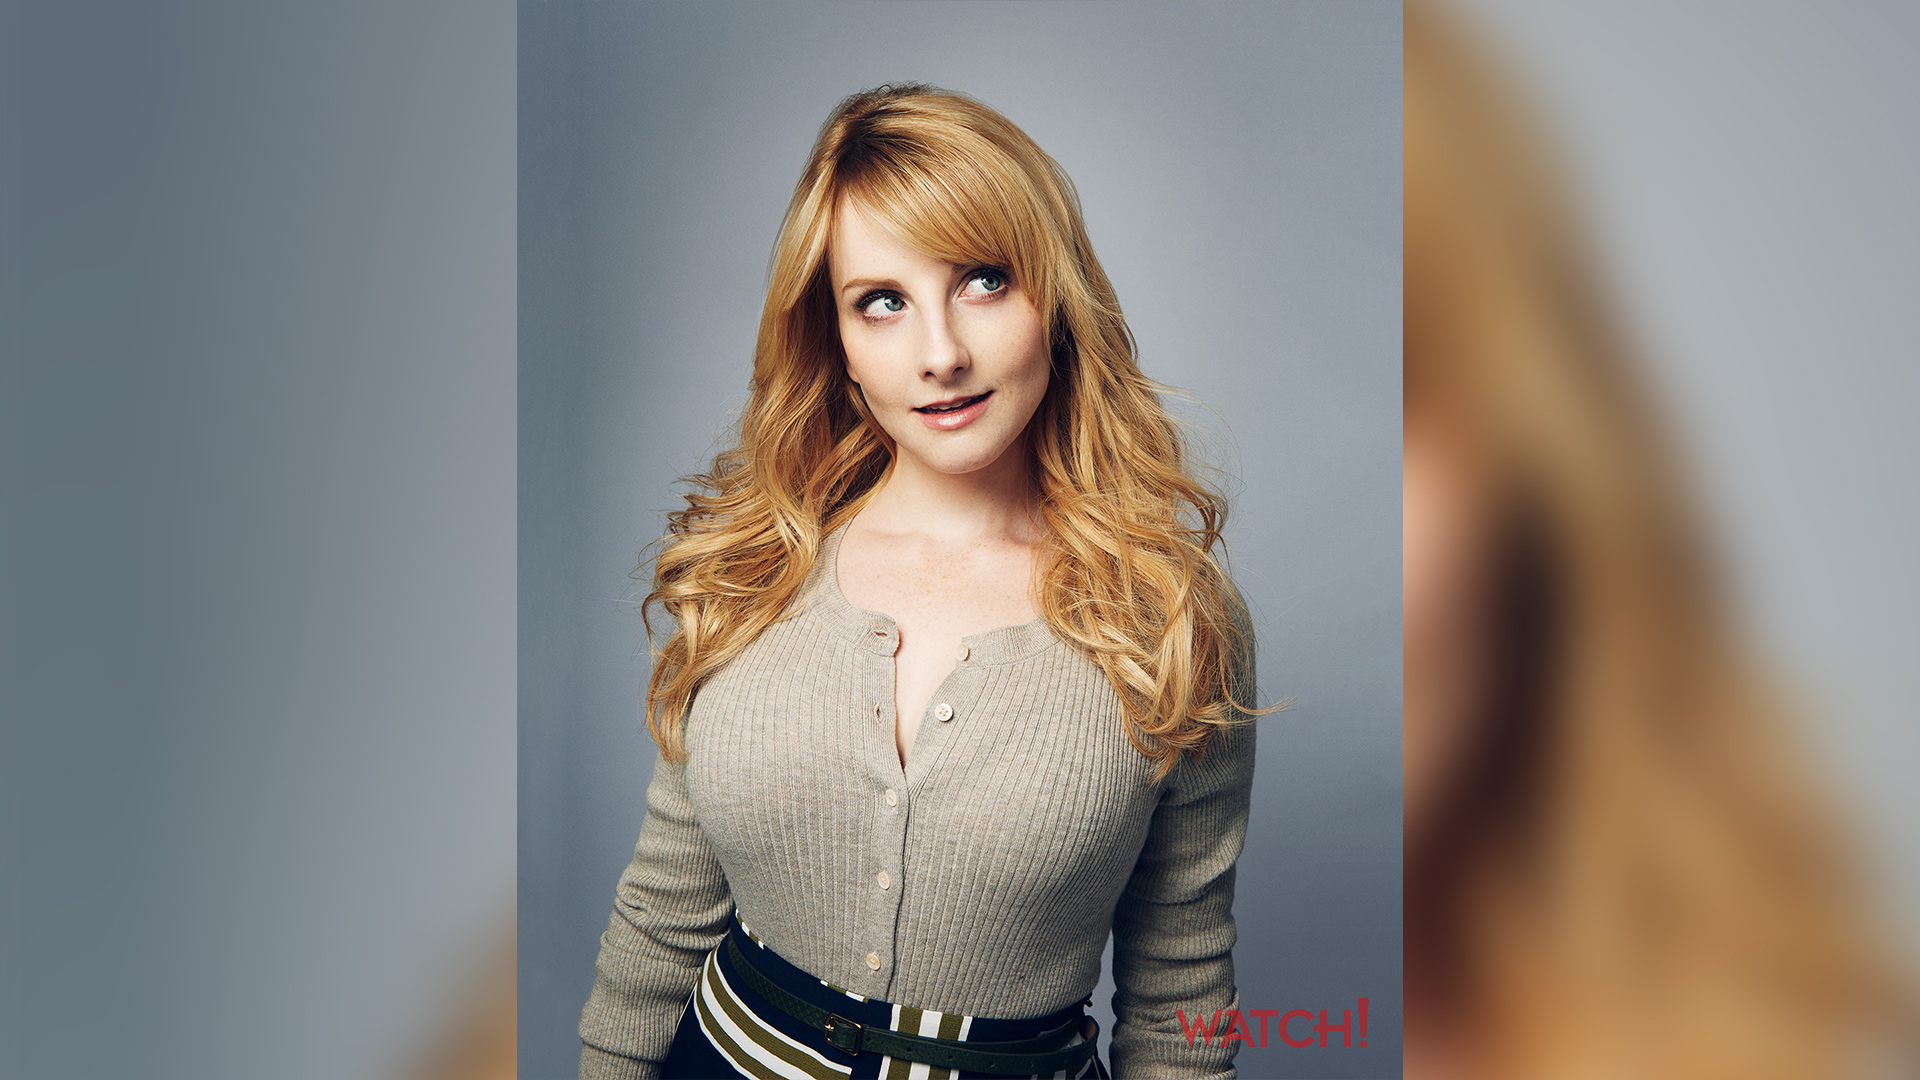 Melissa Rauch Of The Big Bang Theory Is Mesmerizing In These Photos Watch Magazine Photos Cbs Com The big bang theory star told ellen about getting pulled over by the police and how it became a situation. somebody call for backup! melissa rauch of the big bang theory is